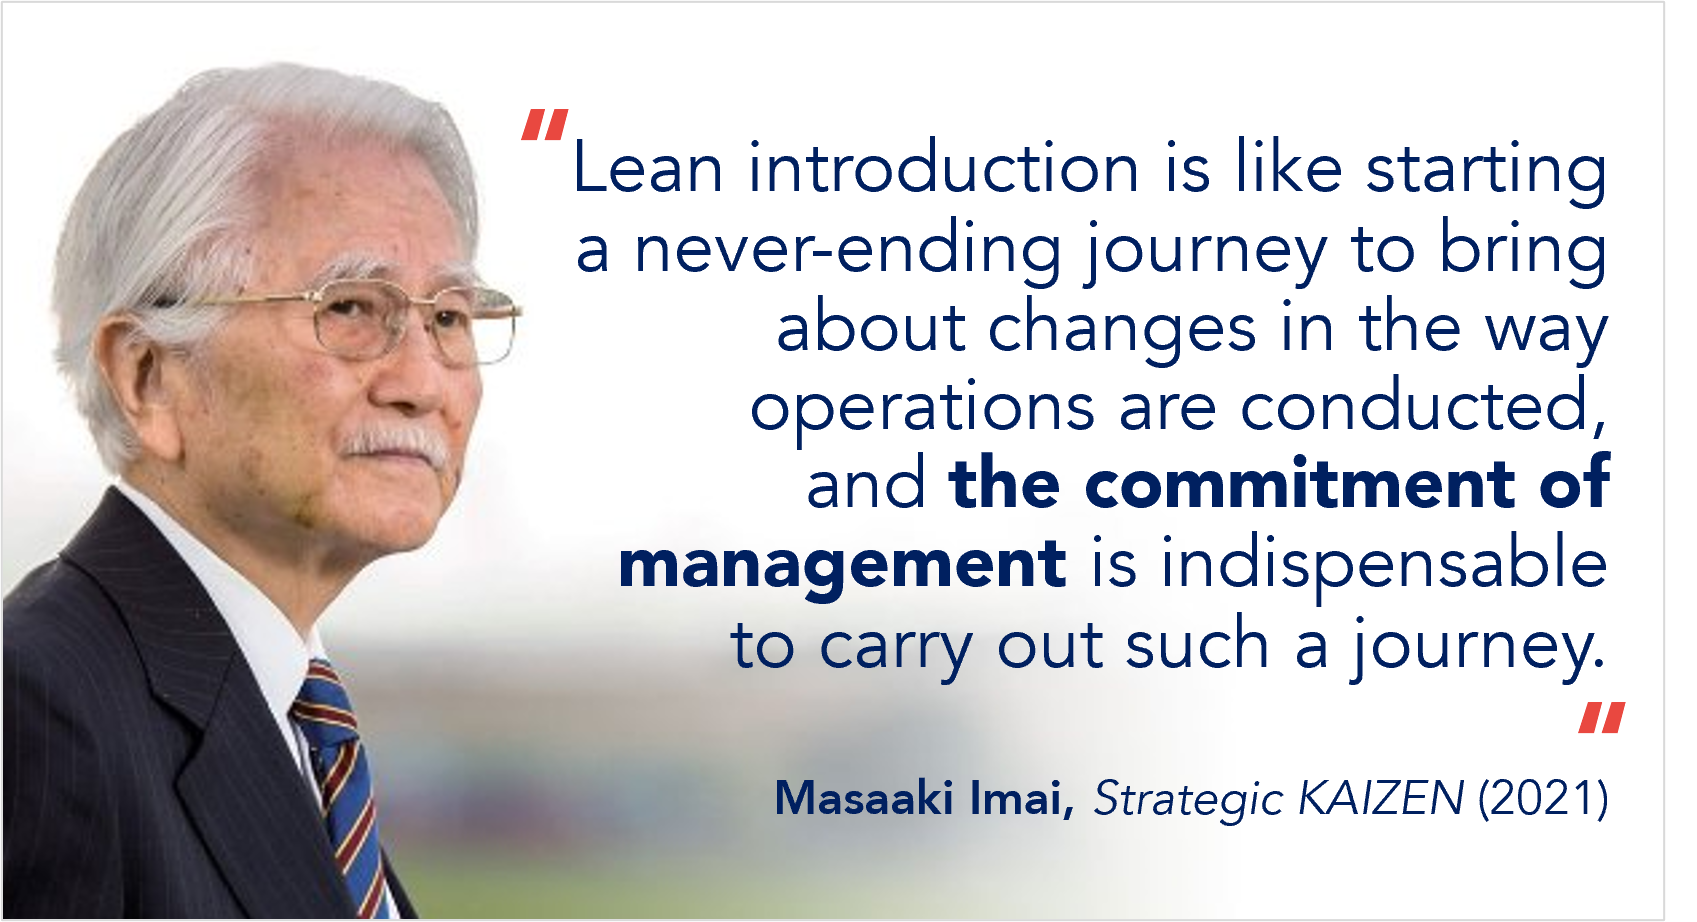 Masaaki Imai quote: “Lean introduction is like starting a never-ending journey to bring about changes in the way operations are conducted, and the commitment of management is indispensable to carry out such a journey.